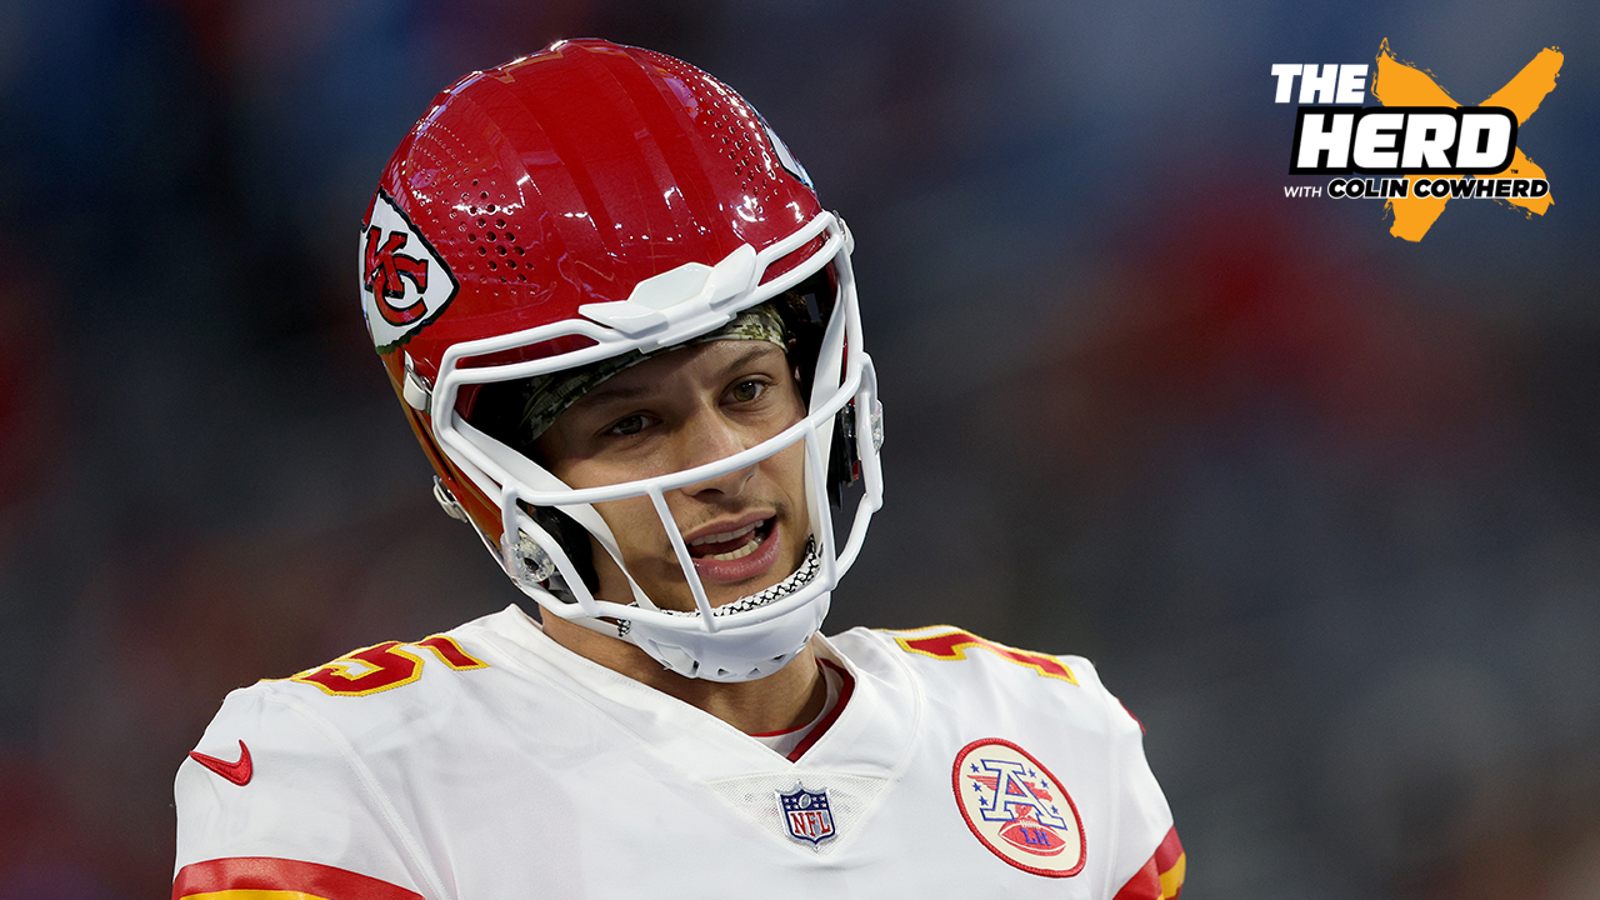 Patrick Mahomes, Chiefs toughest team to beat in the NFL?